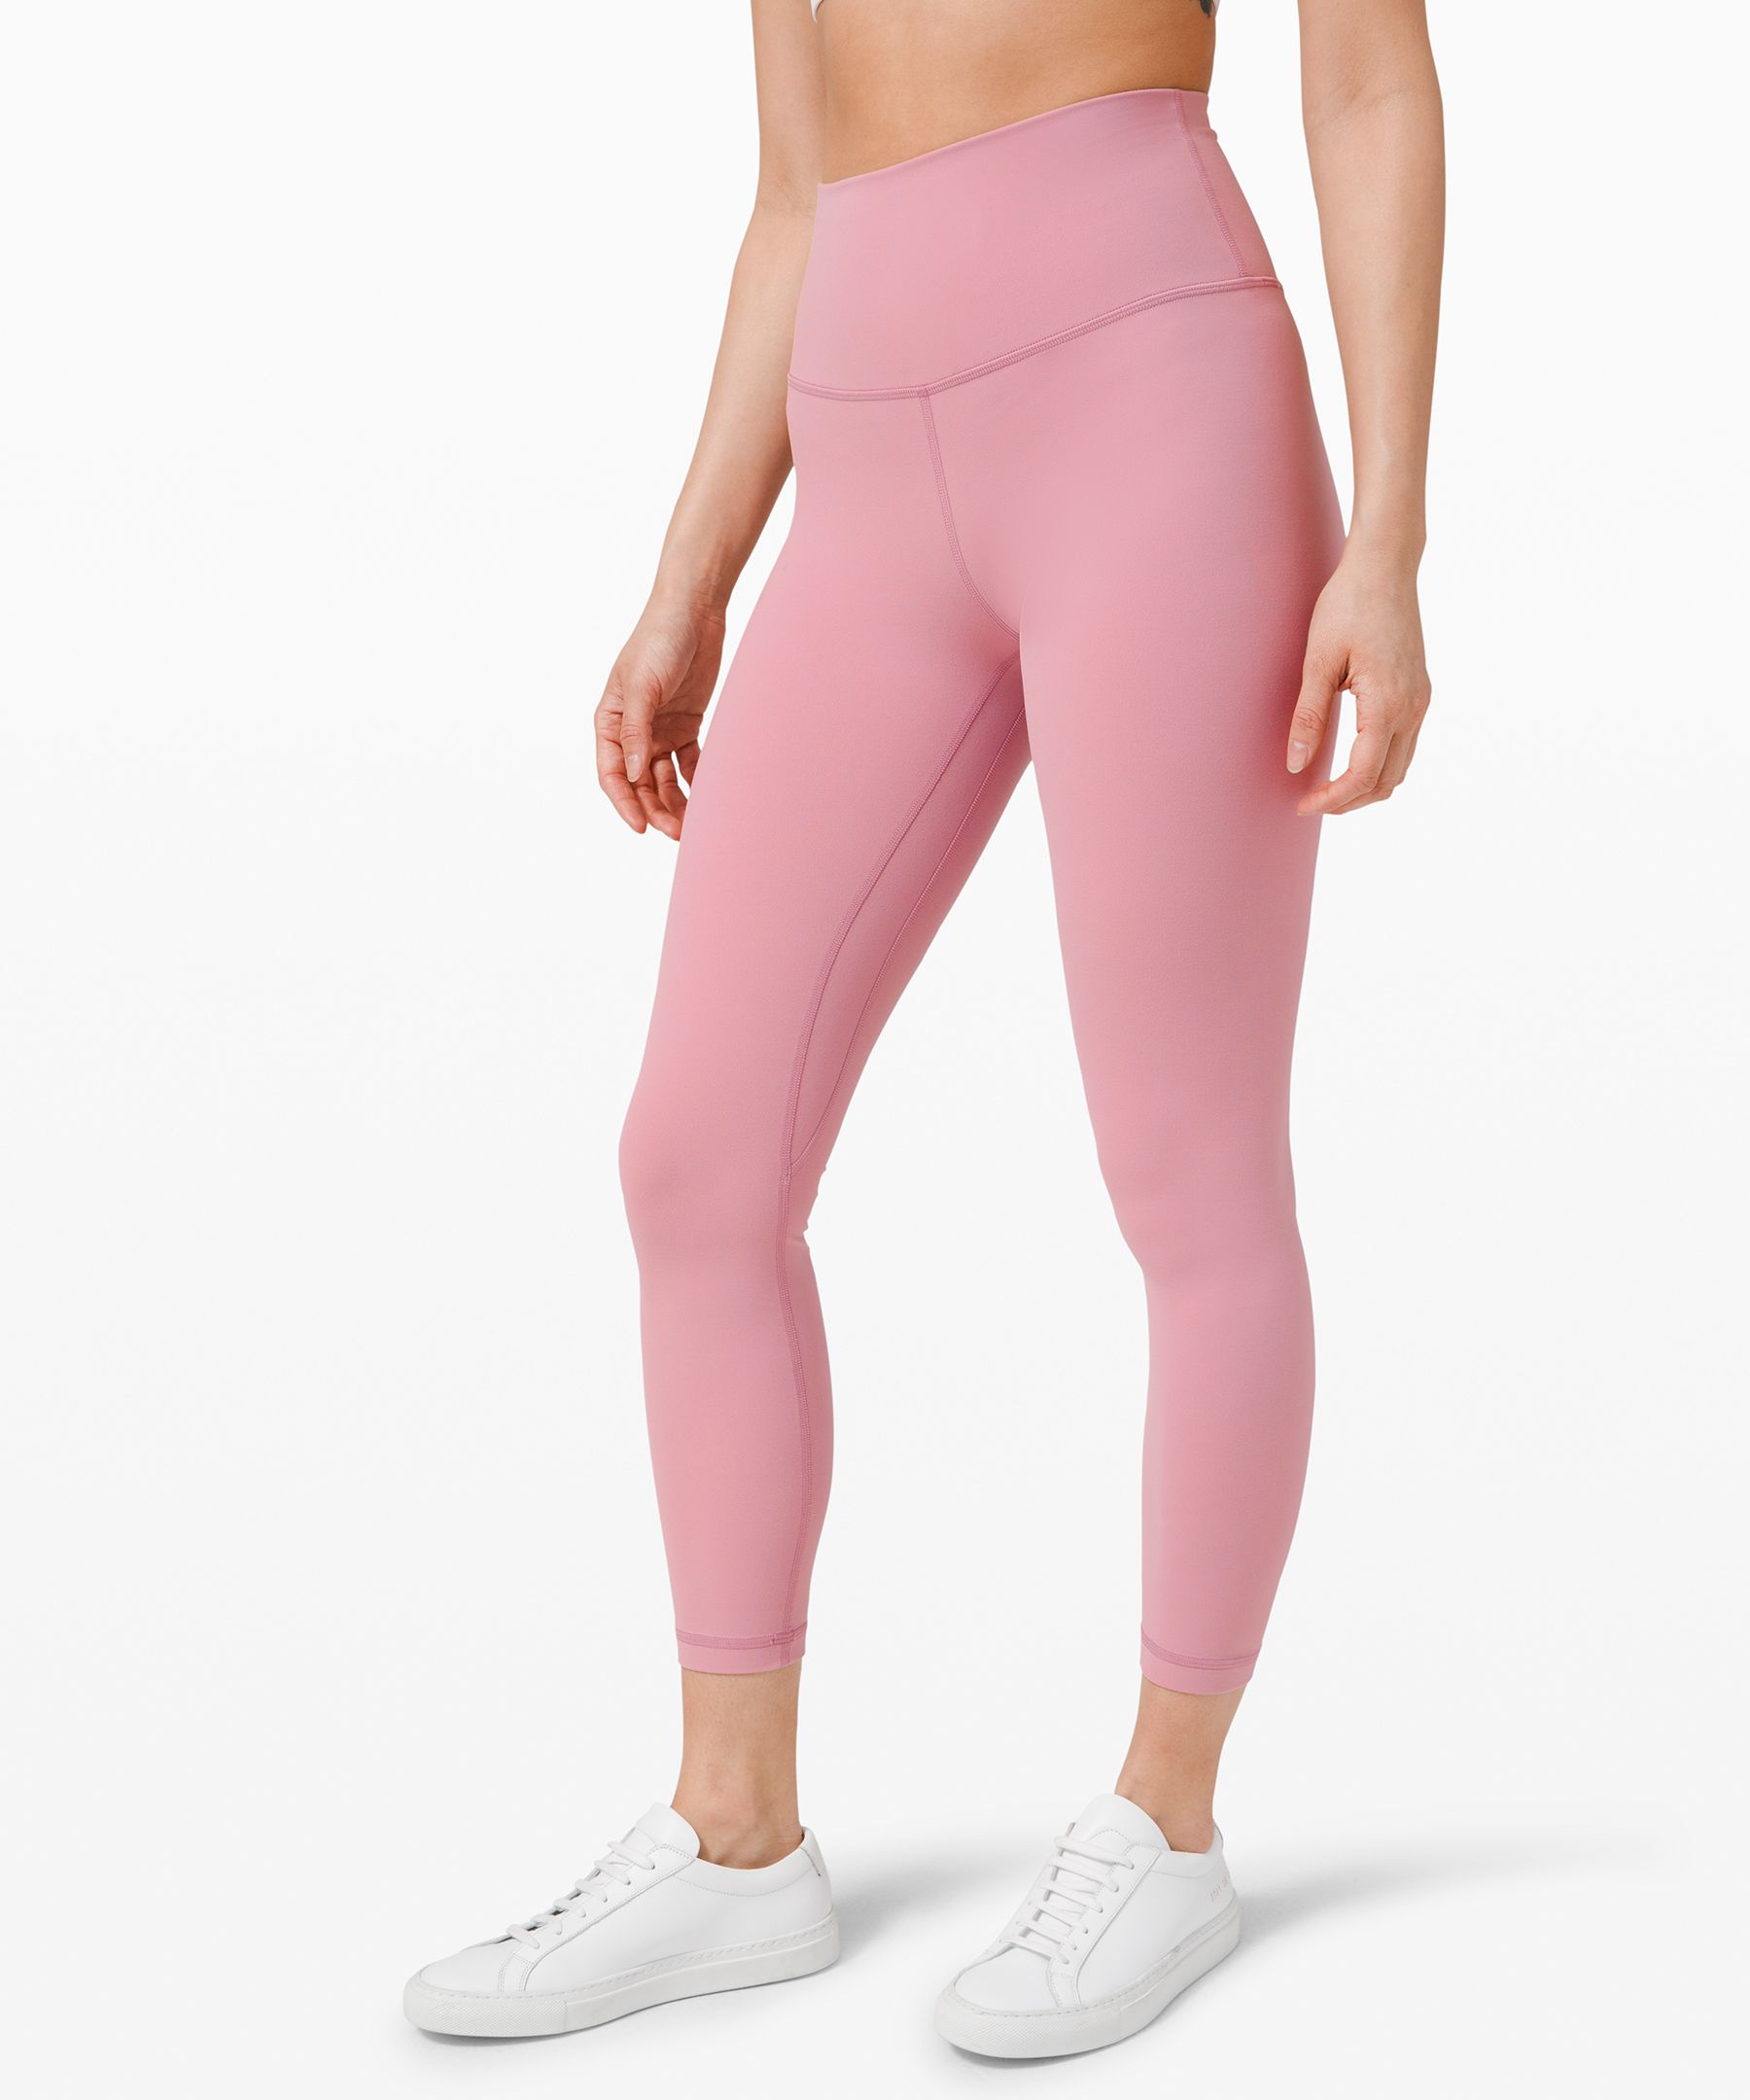 Women's Yoga Clothes For Women 